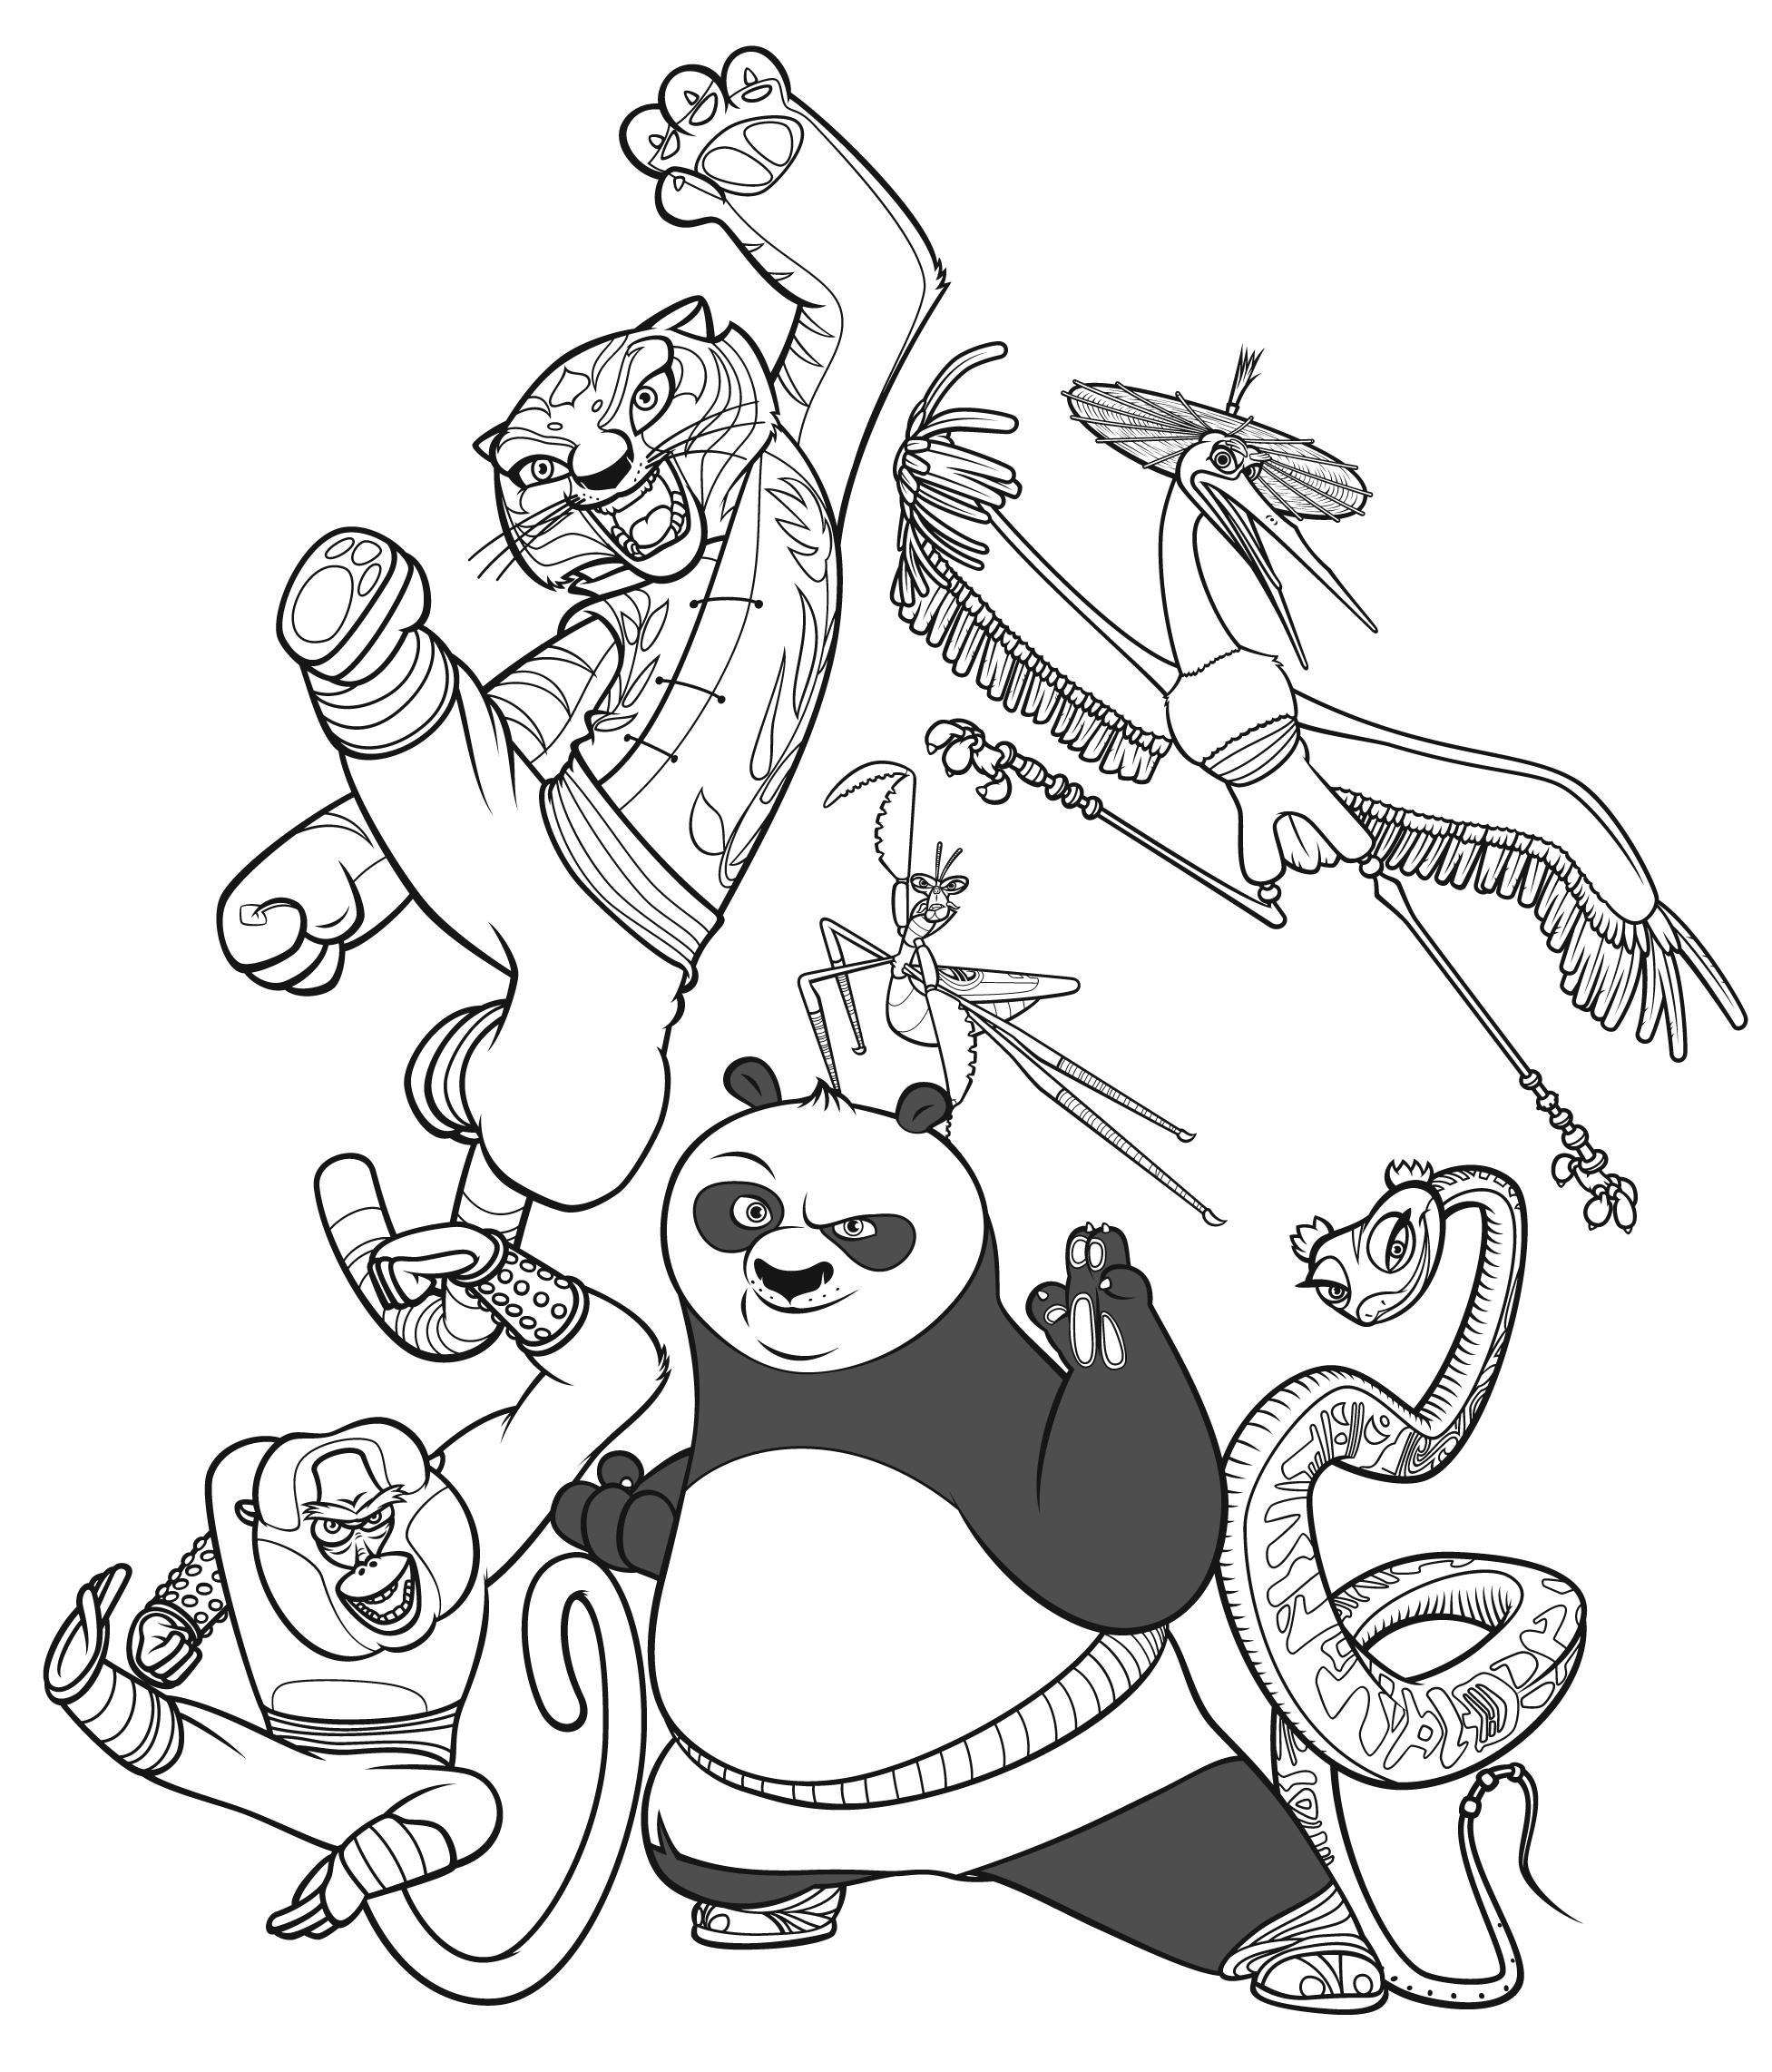 Free Printable Kung Fu Panda Coloring Pages For Kids